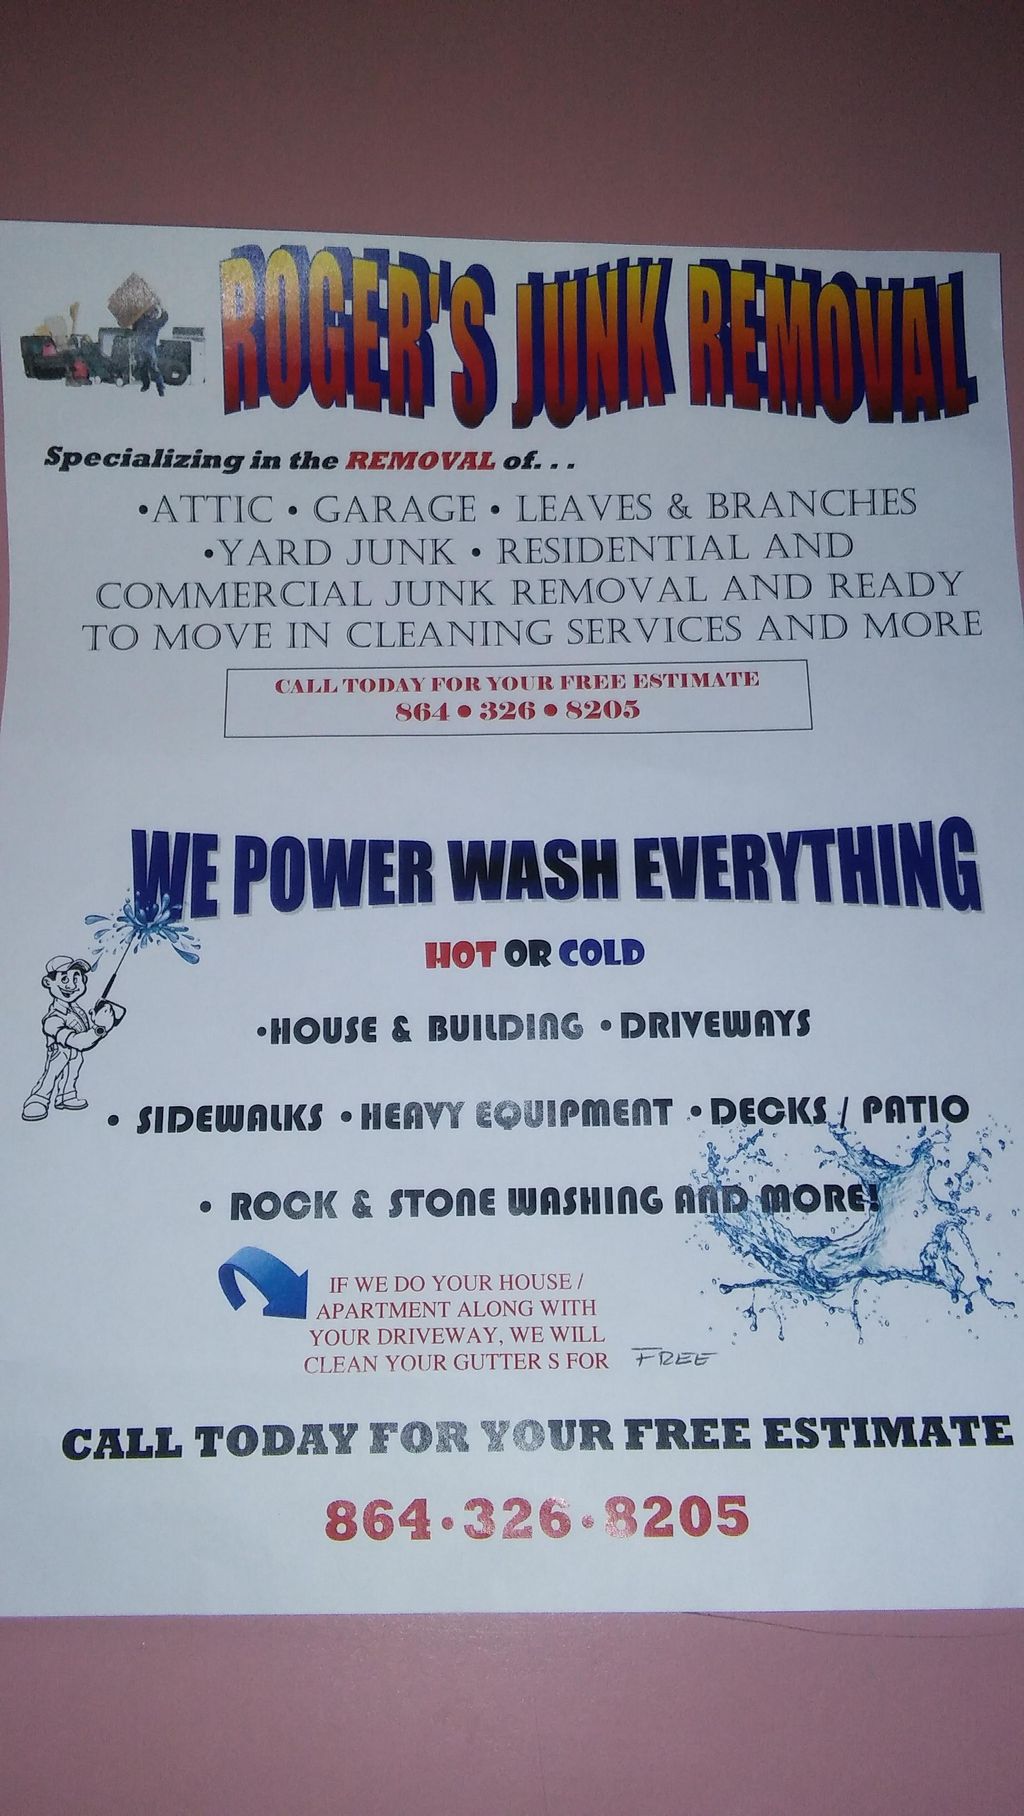 Roger's Junk Removal & Power Wash